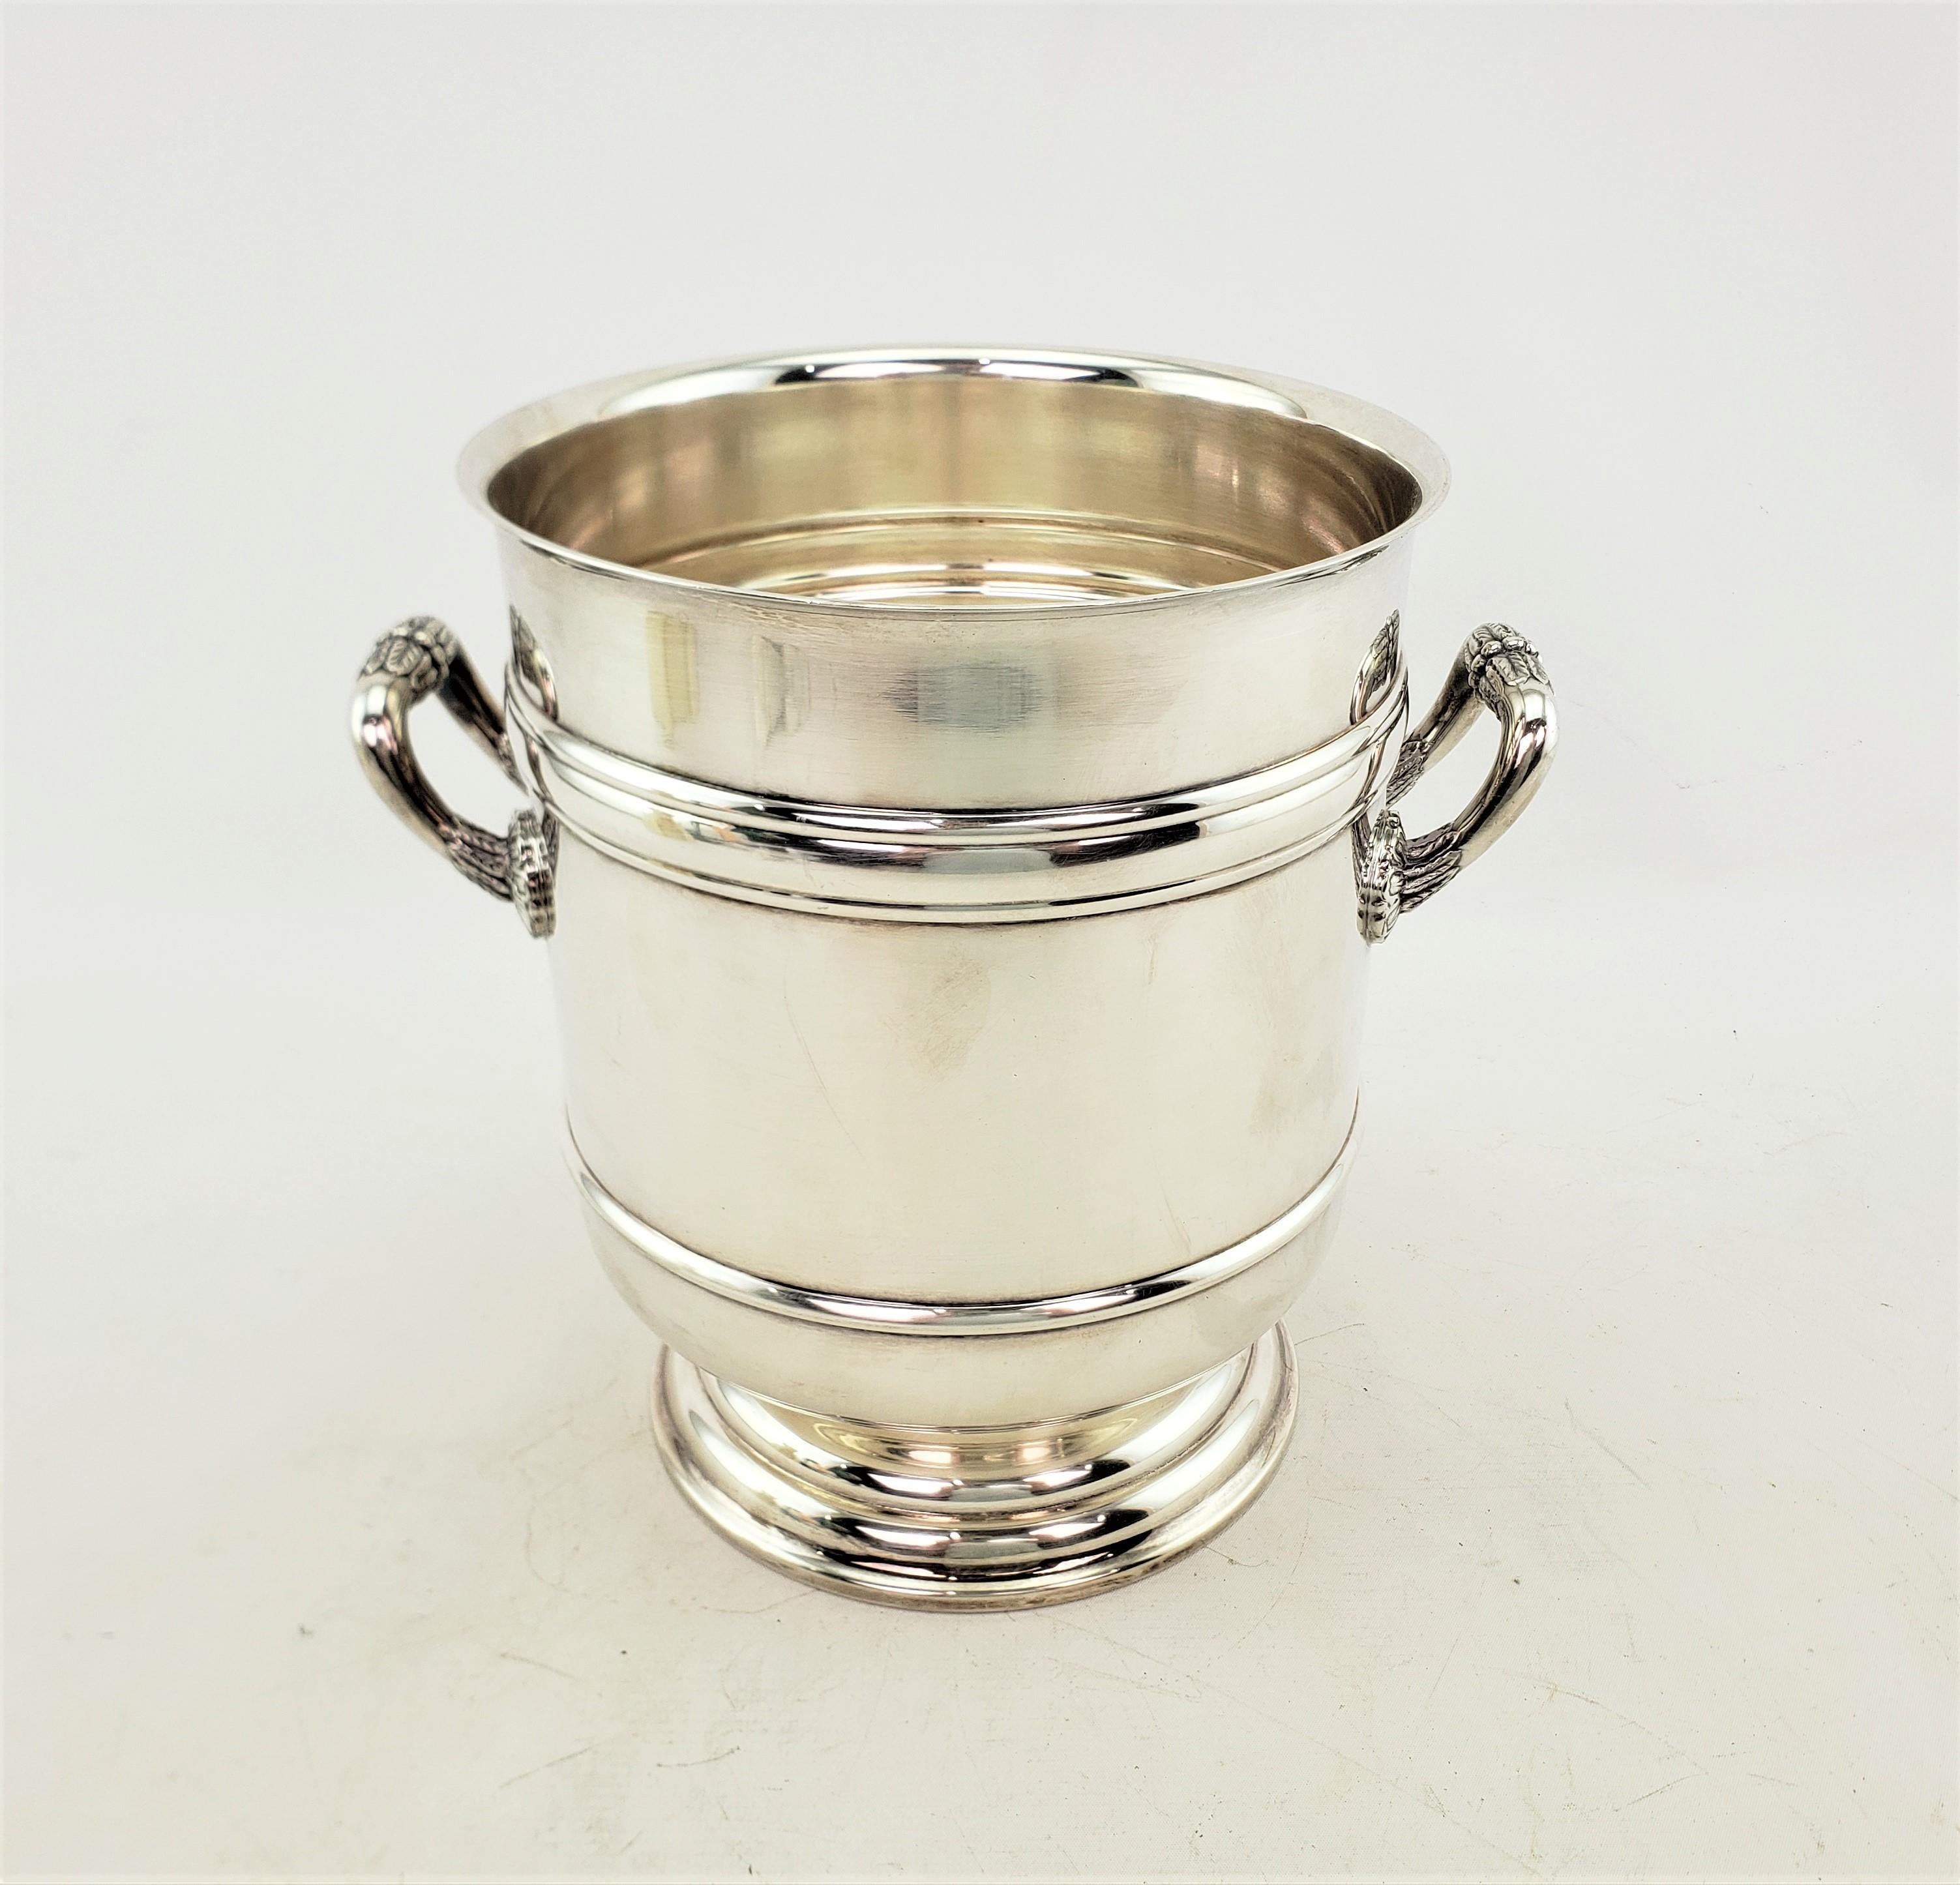 20th Century Mid-Century Era Christofle Silver Plated Ice Bucket or Bottle Chiller For Sale